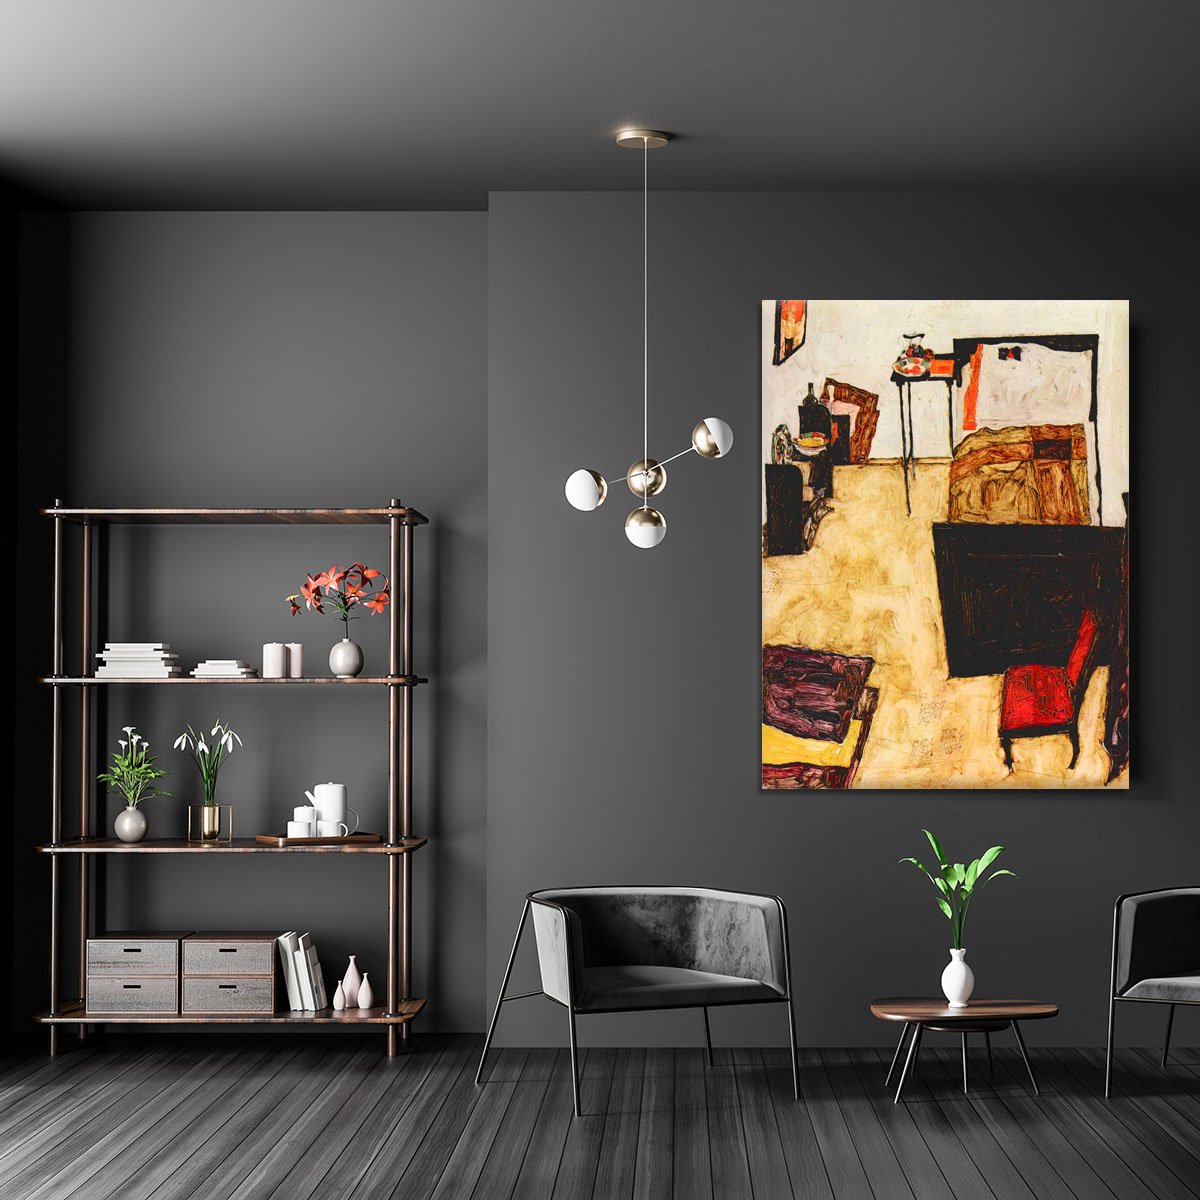 Schiele's living room in Neulengbach by Egon Schiele Canvas Print or Poster